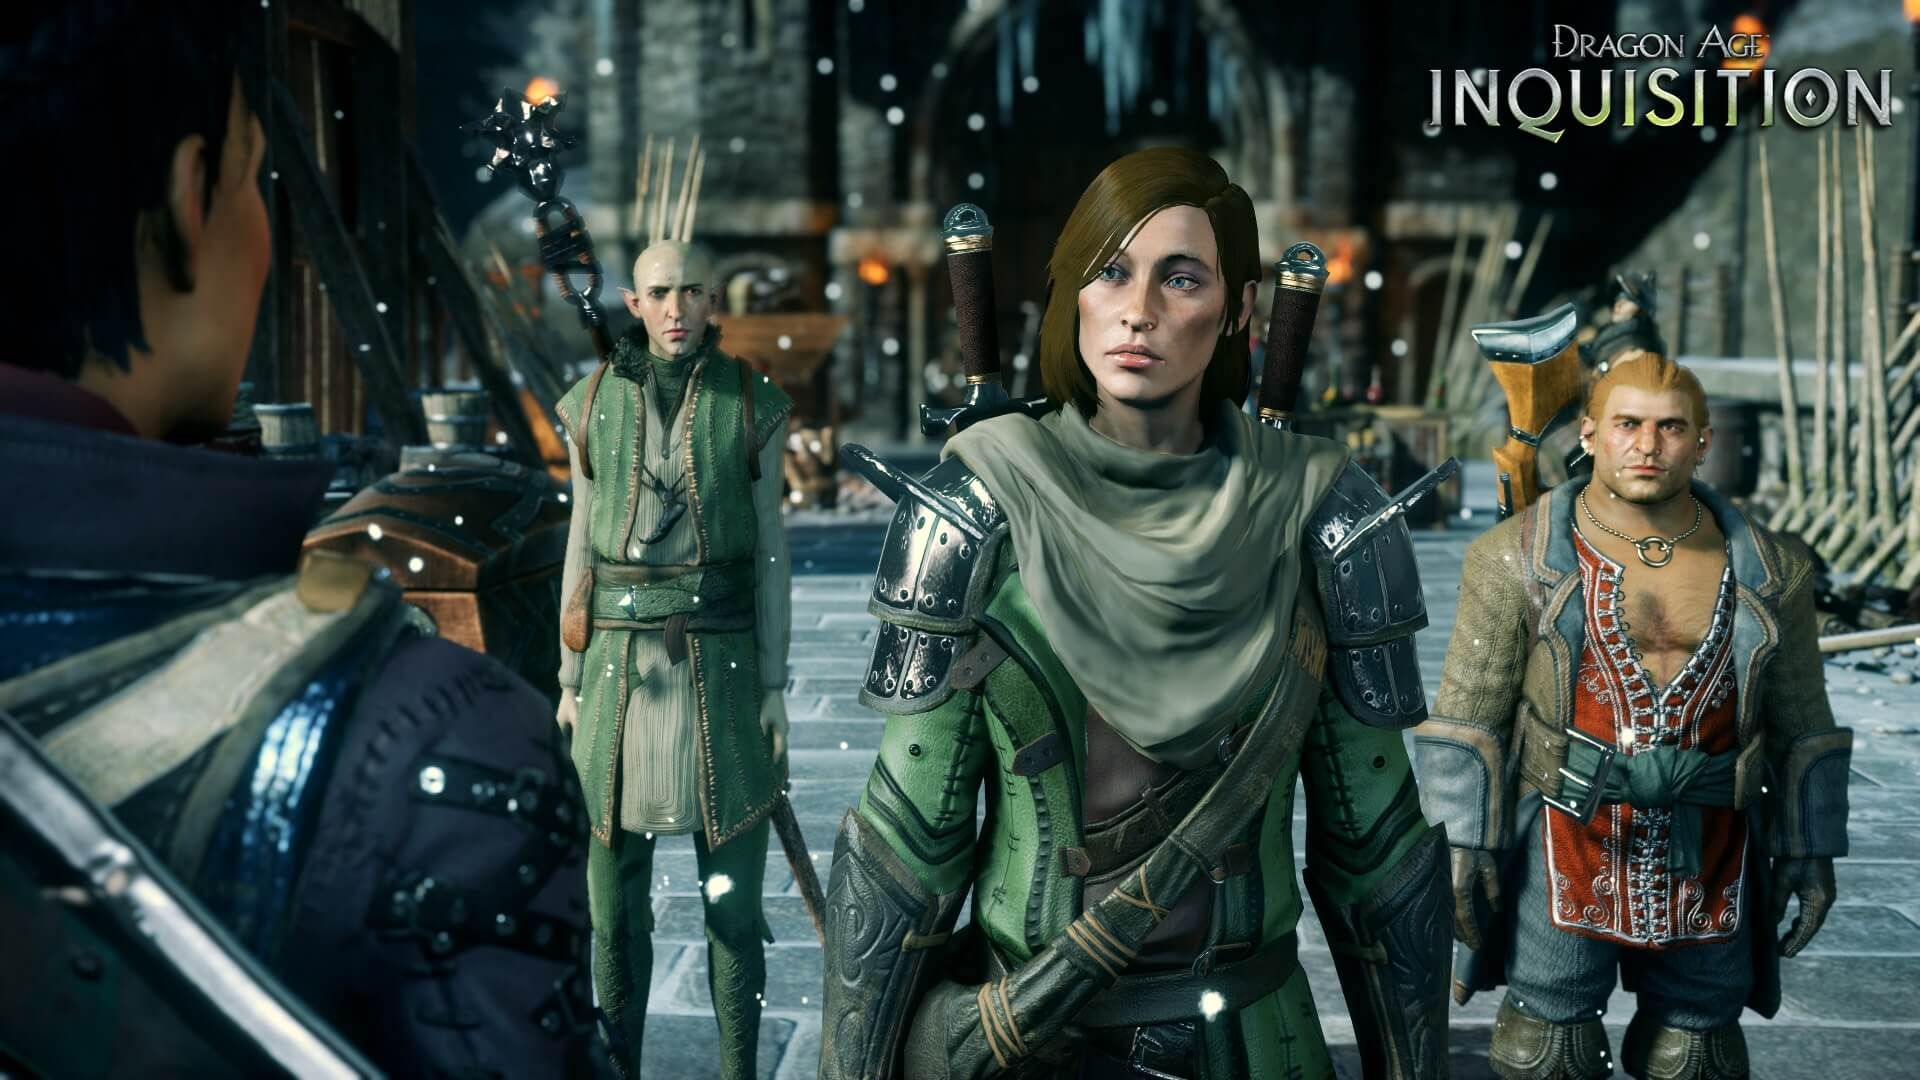 Dragon Age Inquisition Skyrim RPG Difference